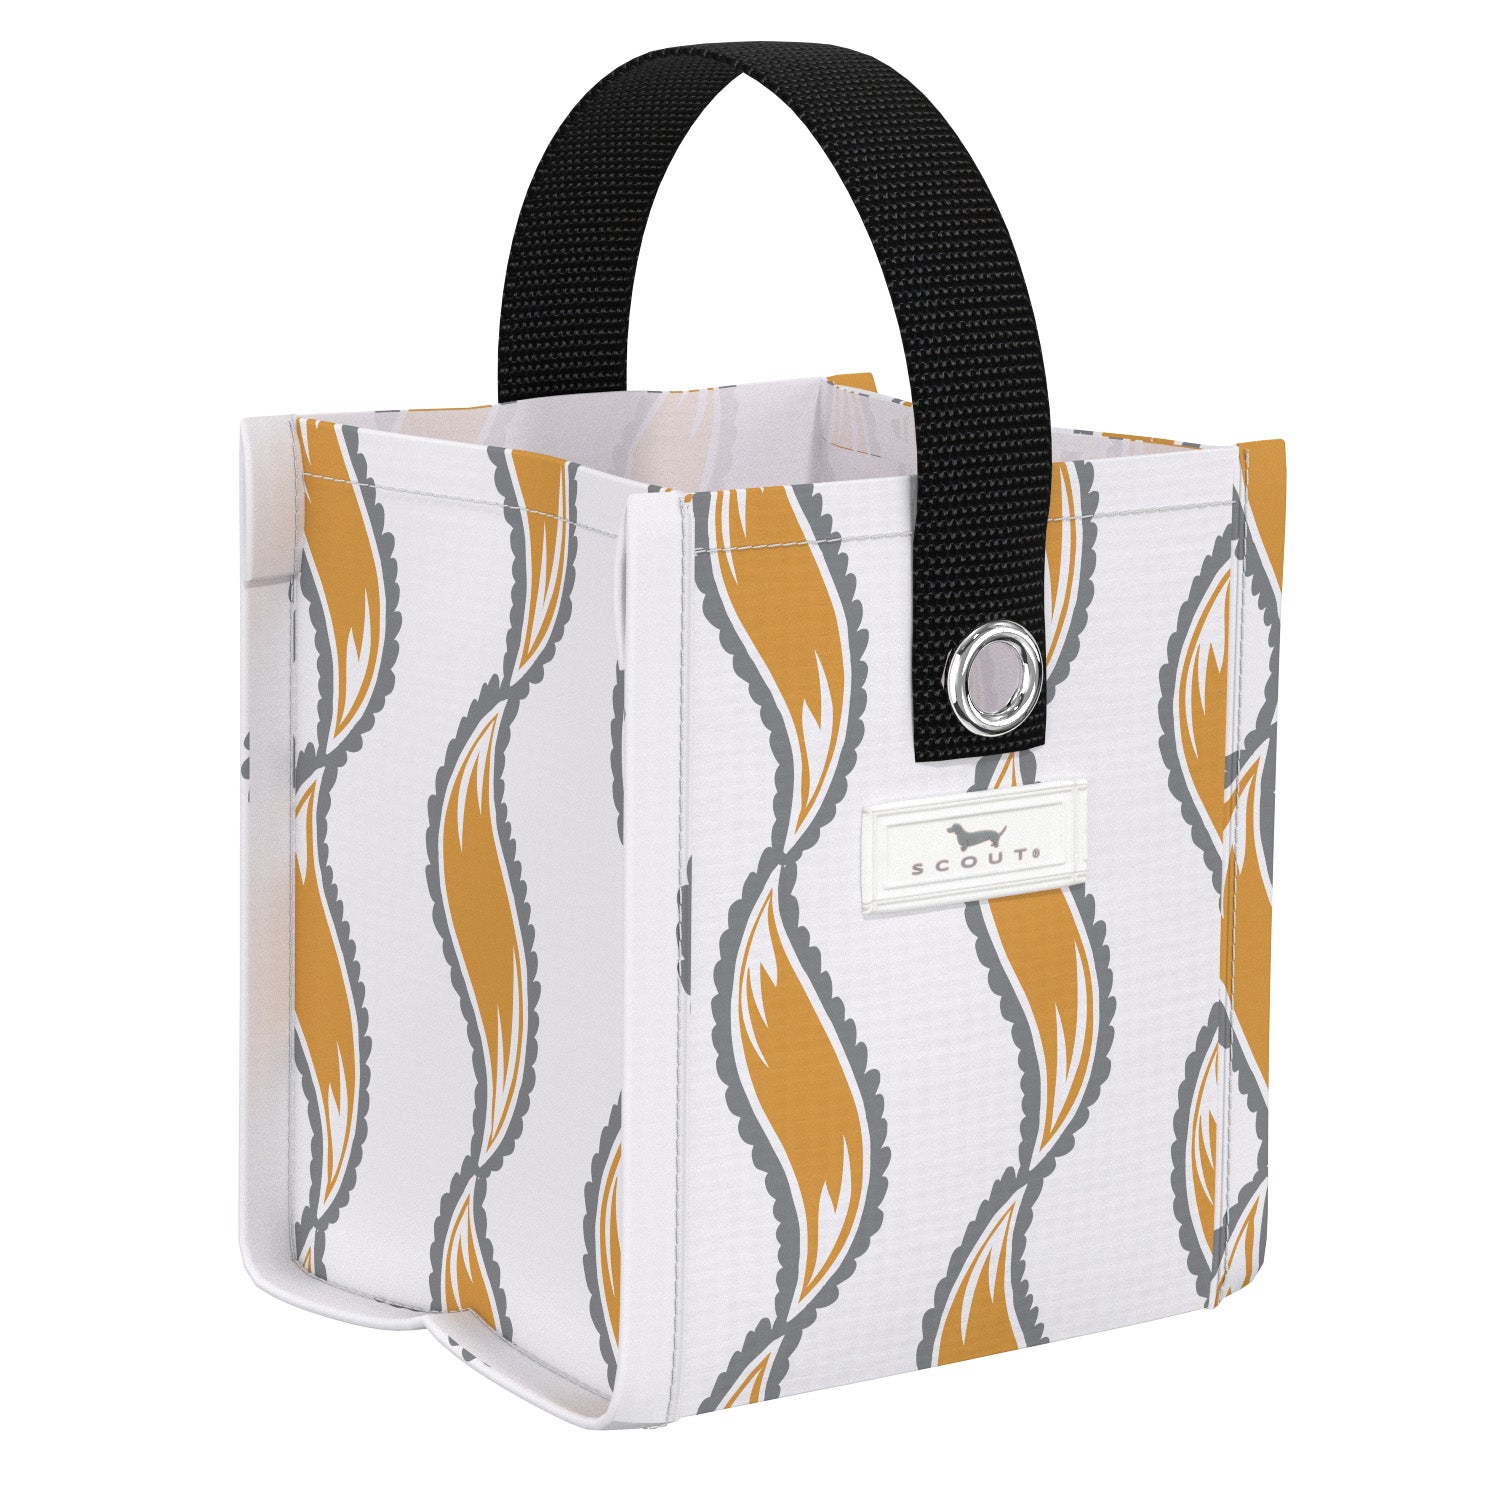 Mini gift Bag, Mini party tote bags, Small cotton Tote, Tote bag gifts